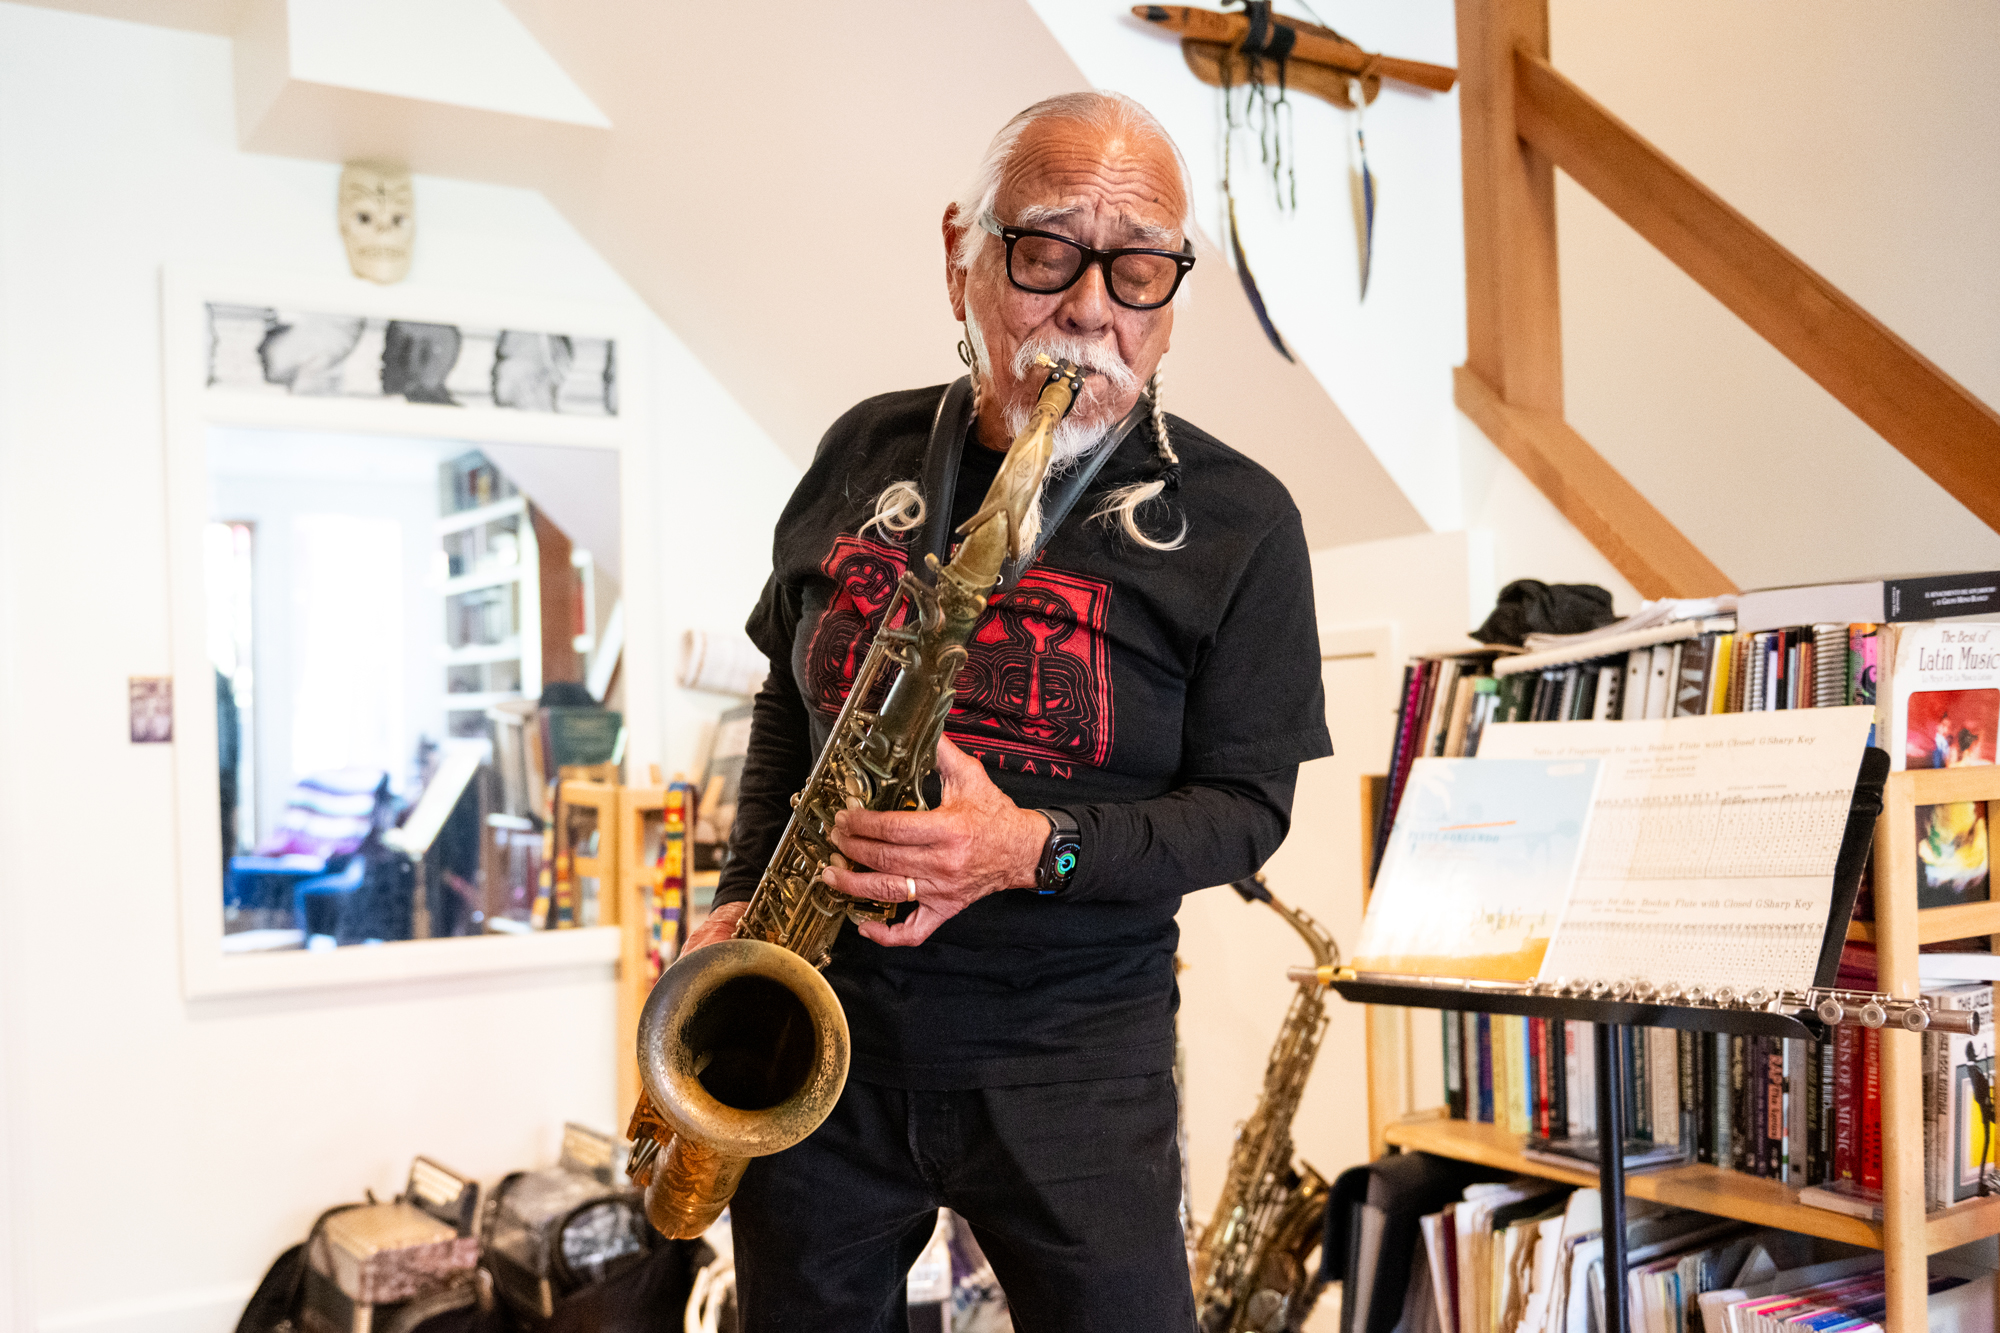 An older man with white braids and glasses plays a saxophone in his home